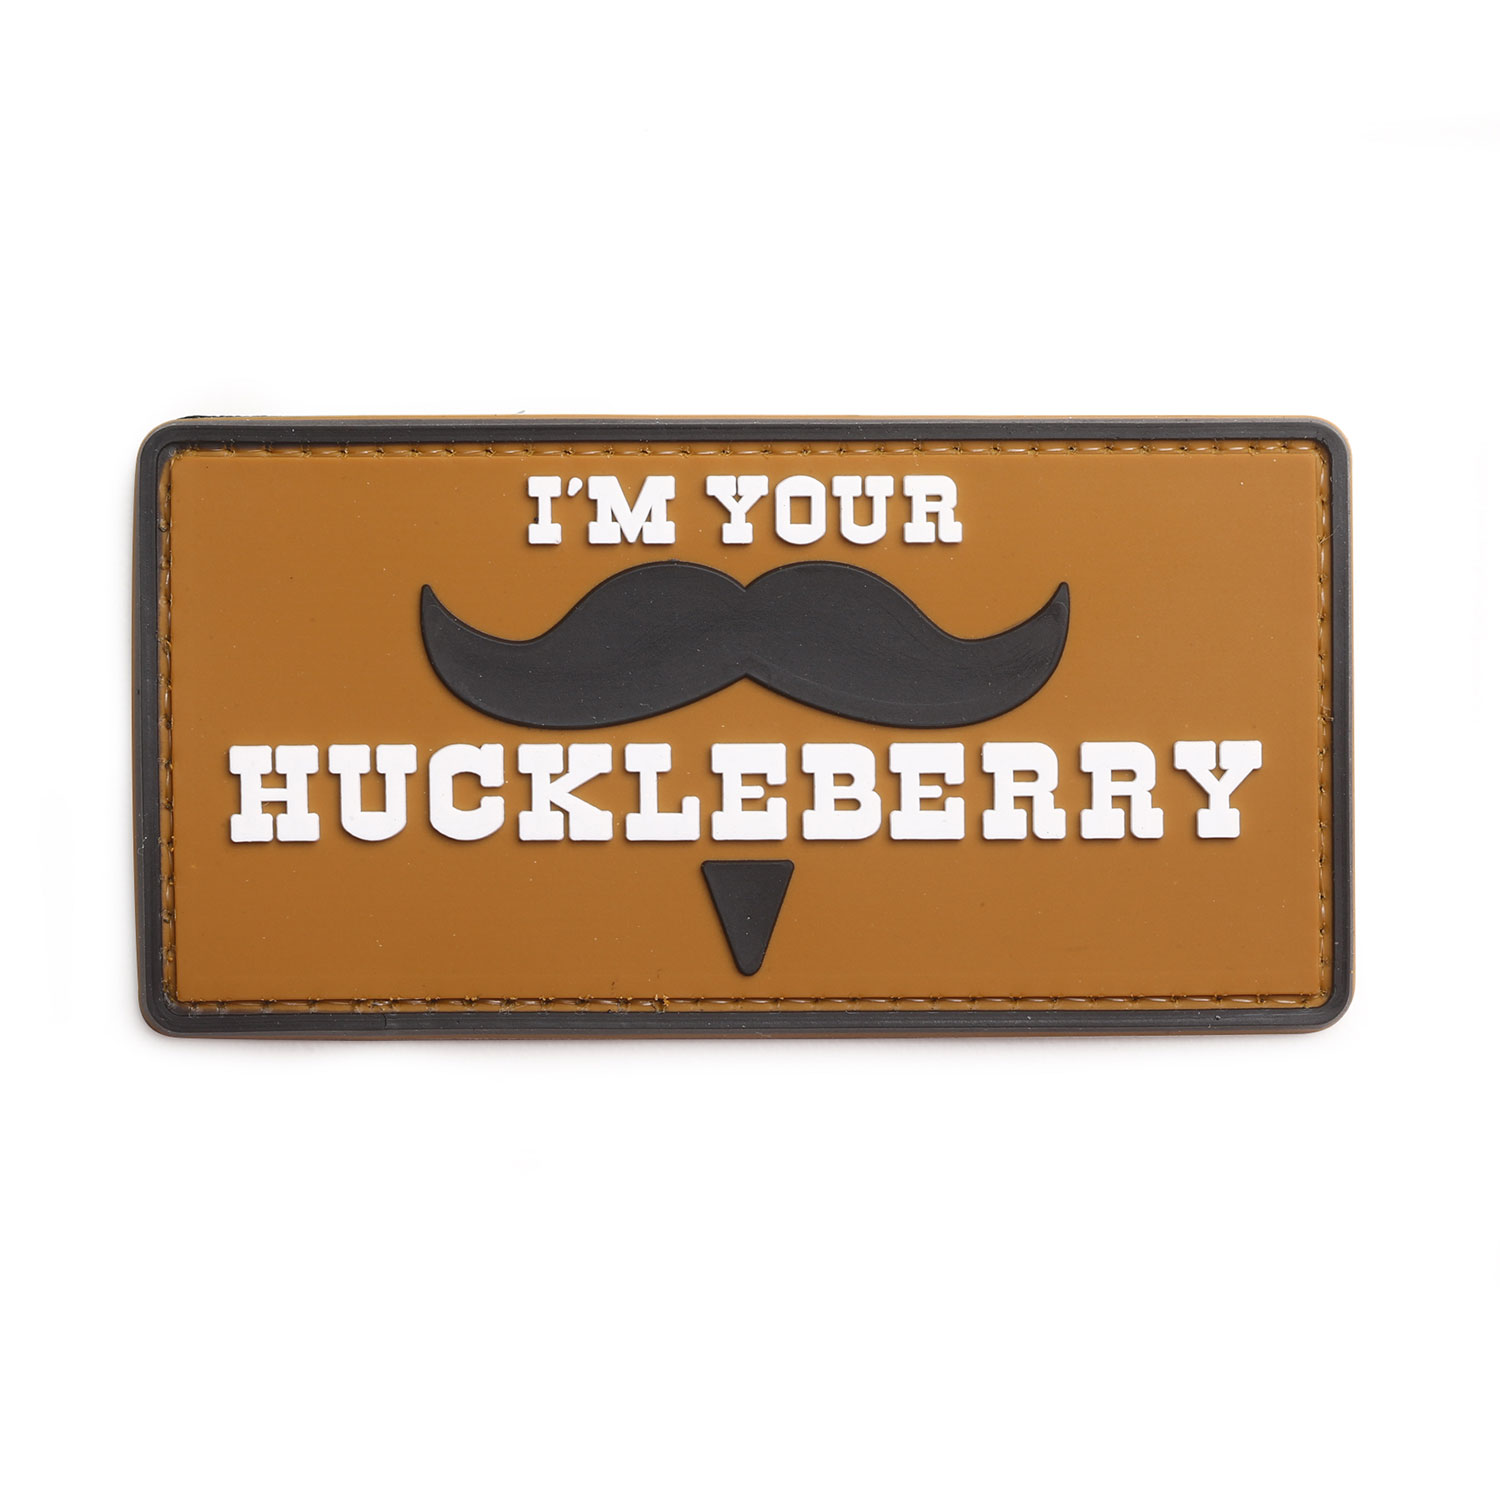 5ive Star Gear “I’m Your Huckleberry” Morale Patch